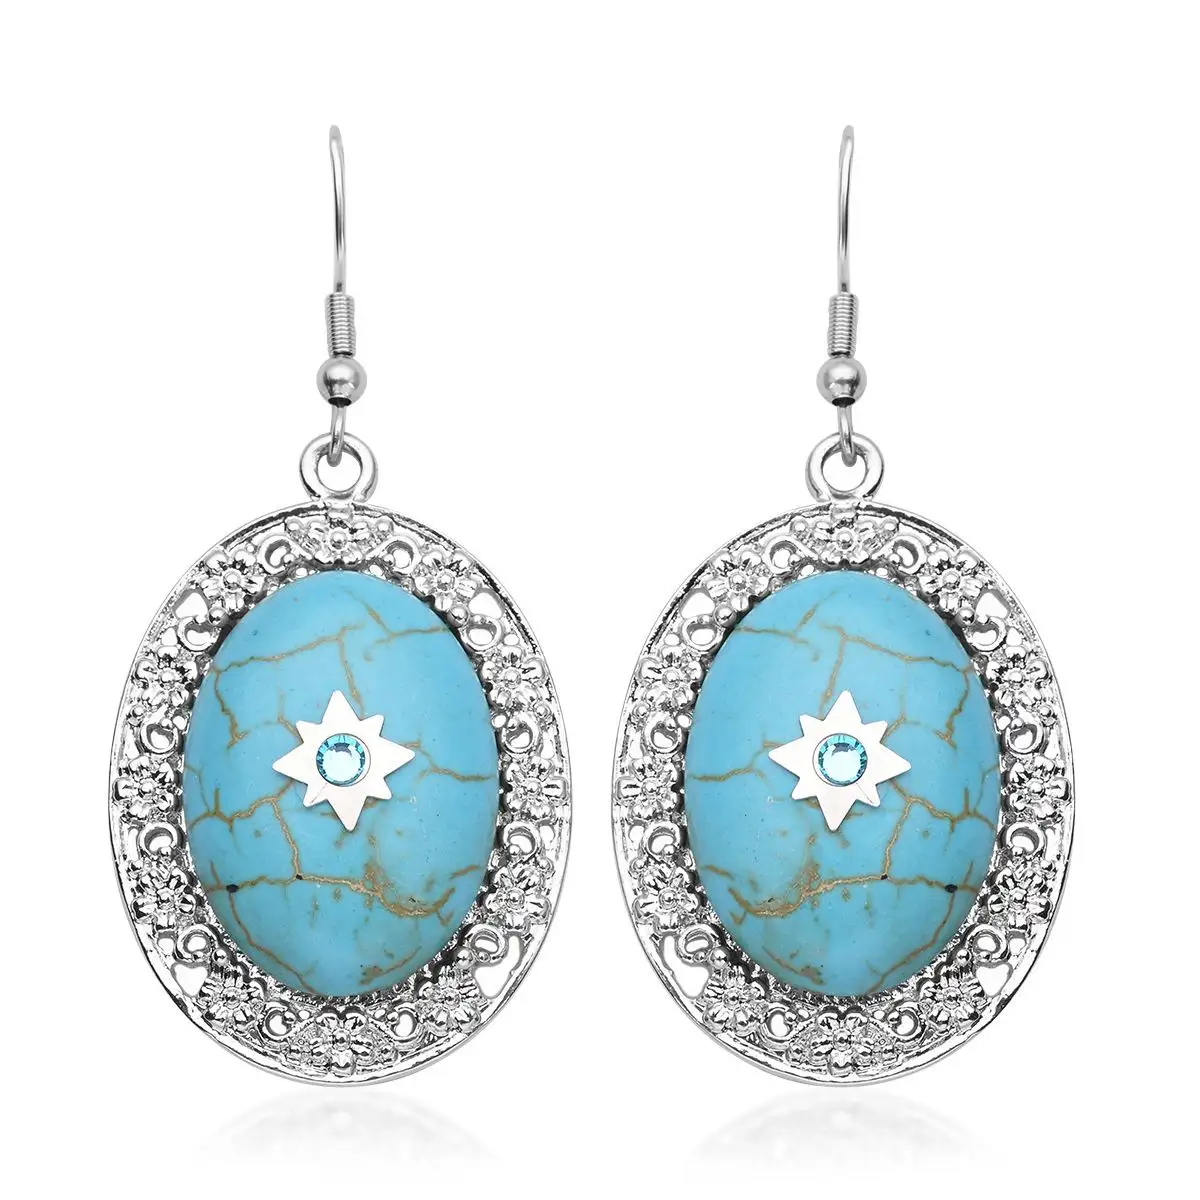 Blue Howlite and Light Blue Austrian Crystal Drop Earrings in Silver tone and 925 Sterling Silver 35.00 ctw